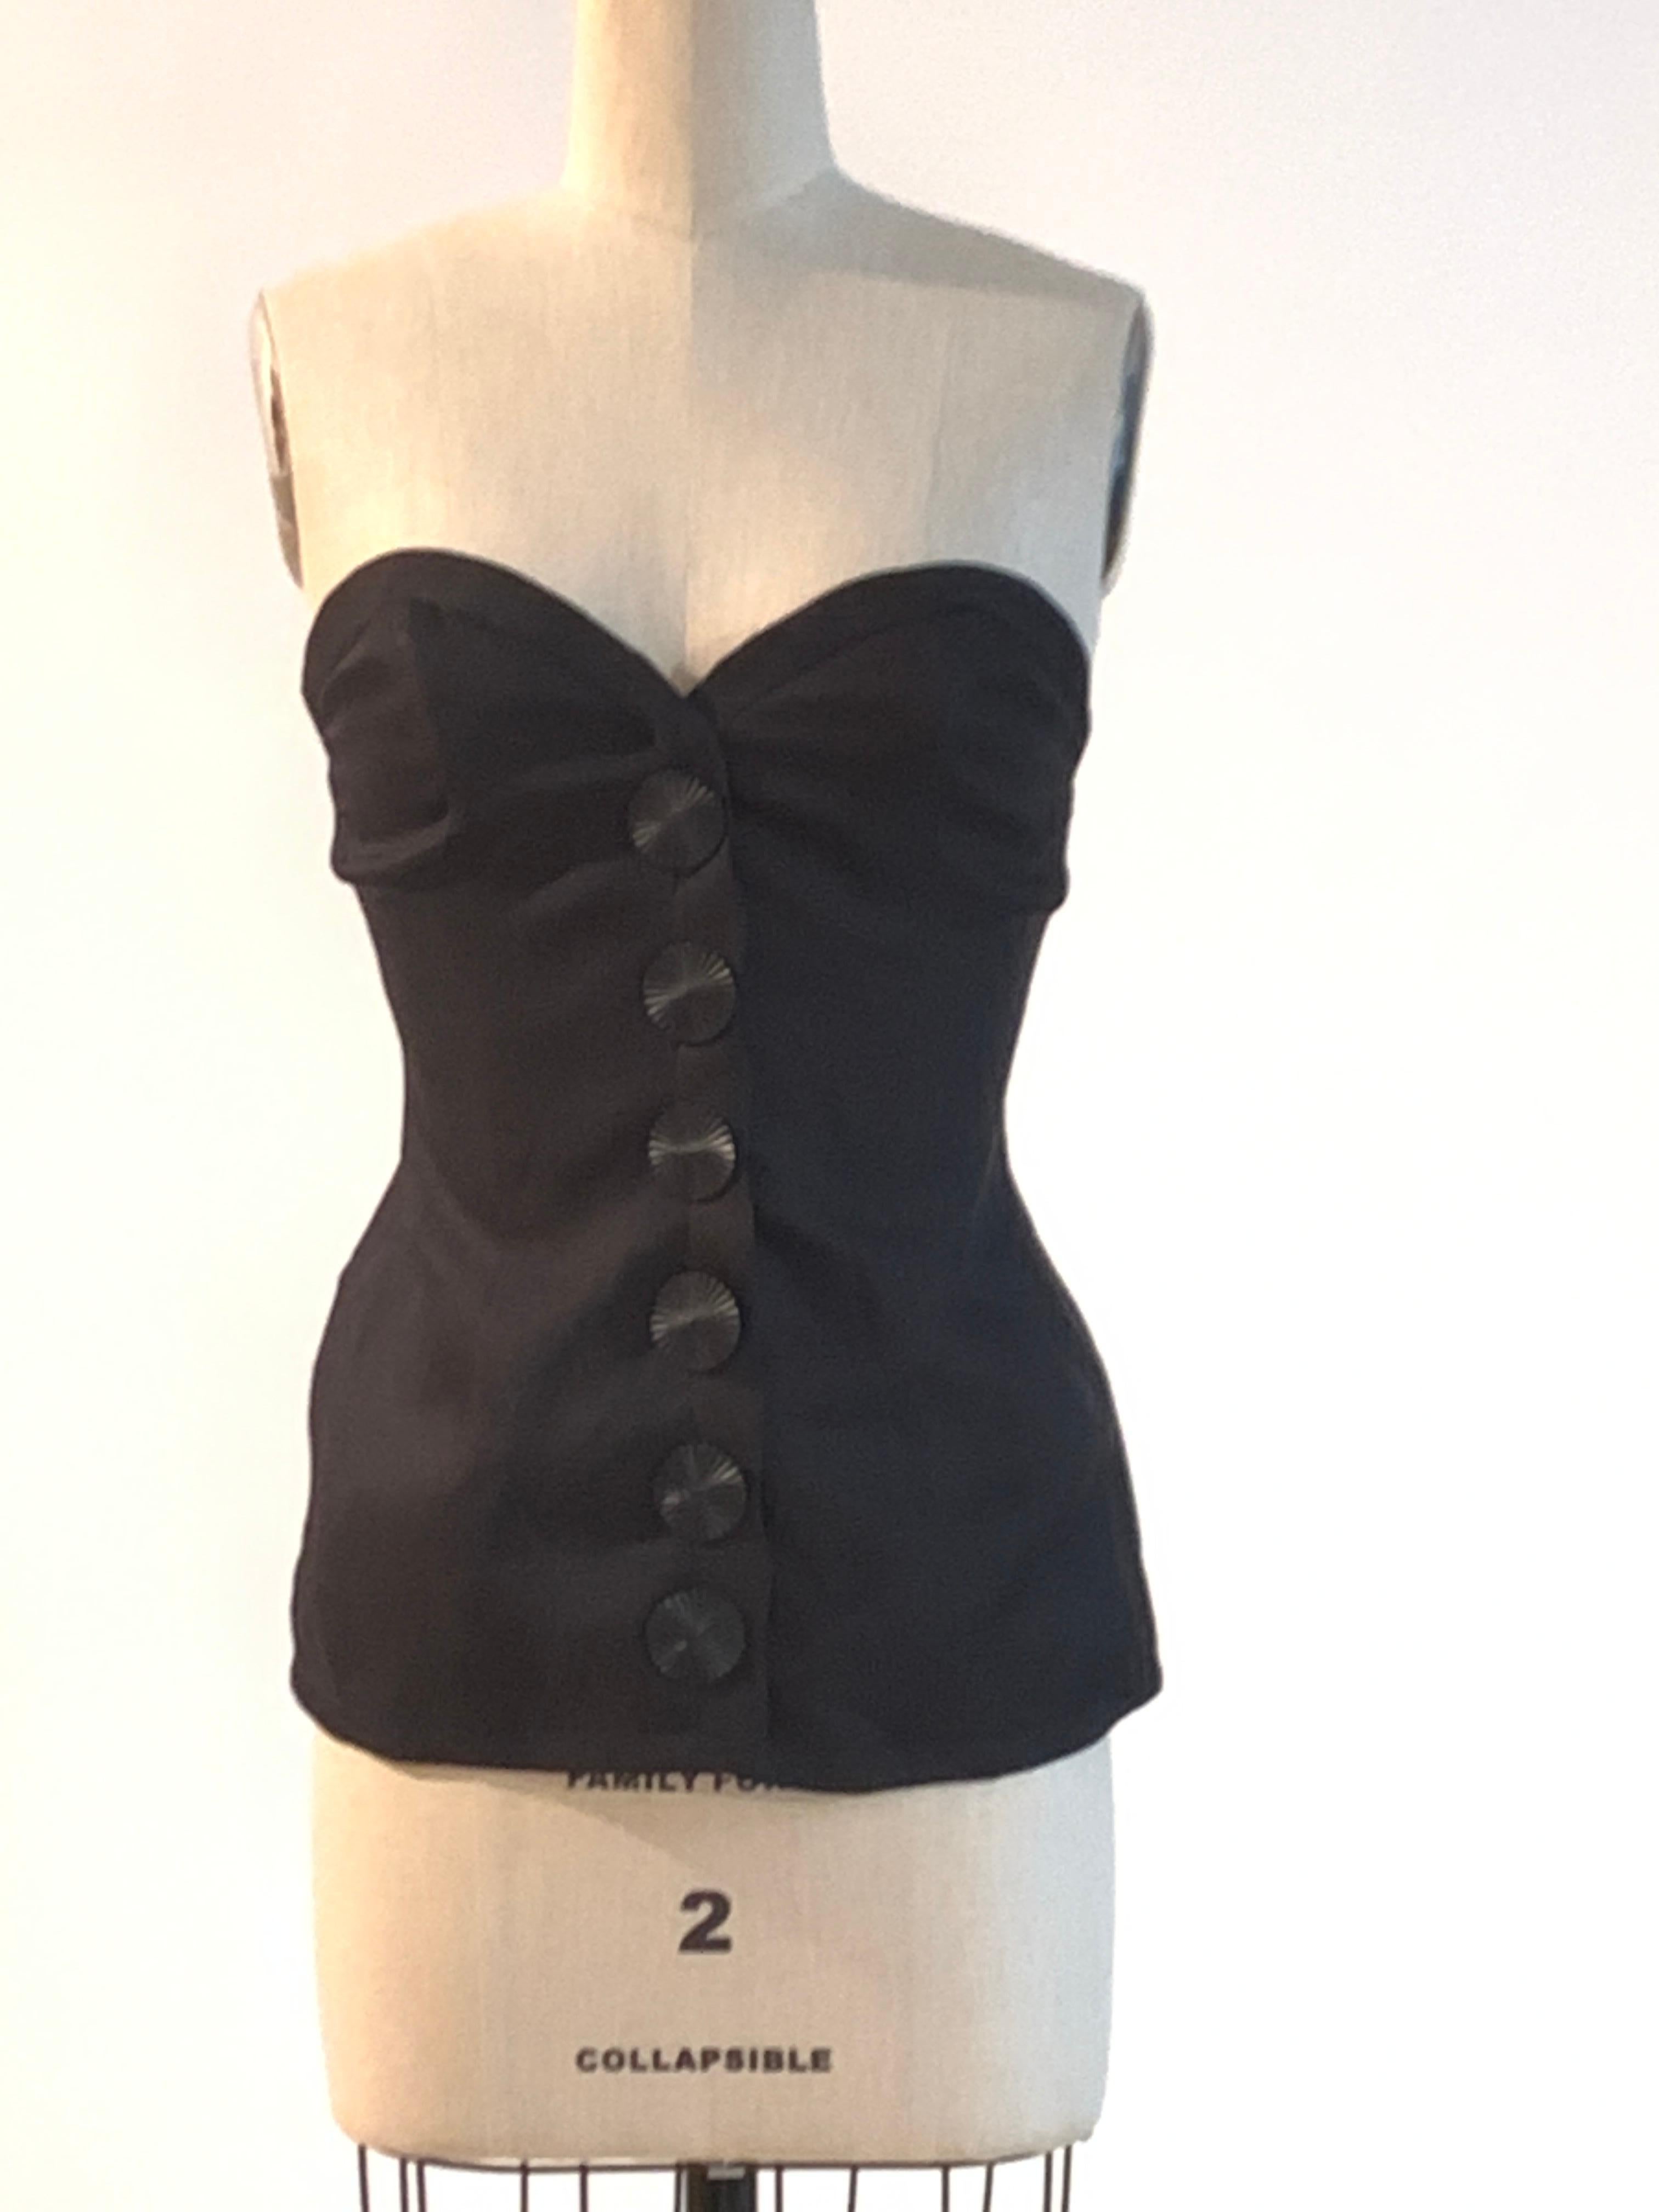 Yves Saint Laurent vintage 1990s strapless structured corset style top with sweetheart neckline and novelty  button closure at front. Boning at top front and top sides. Fastens at front with buttons and a snap and hook at top. 

100% silk.
Fully